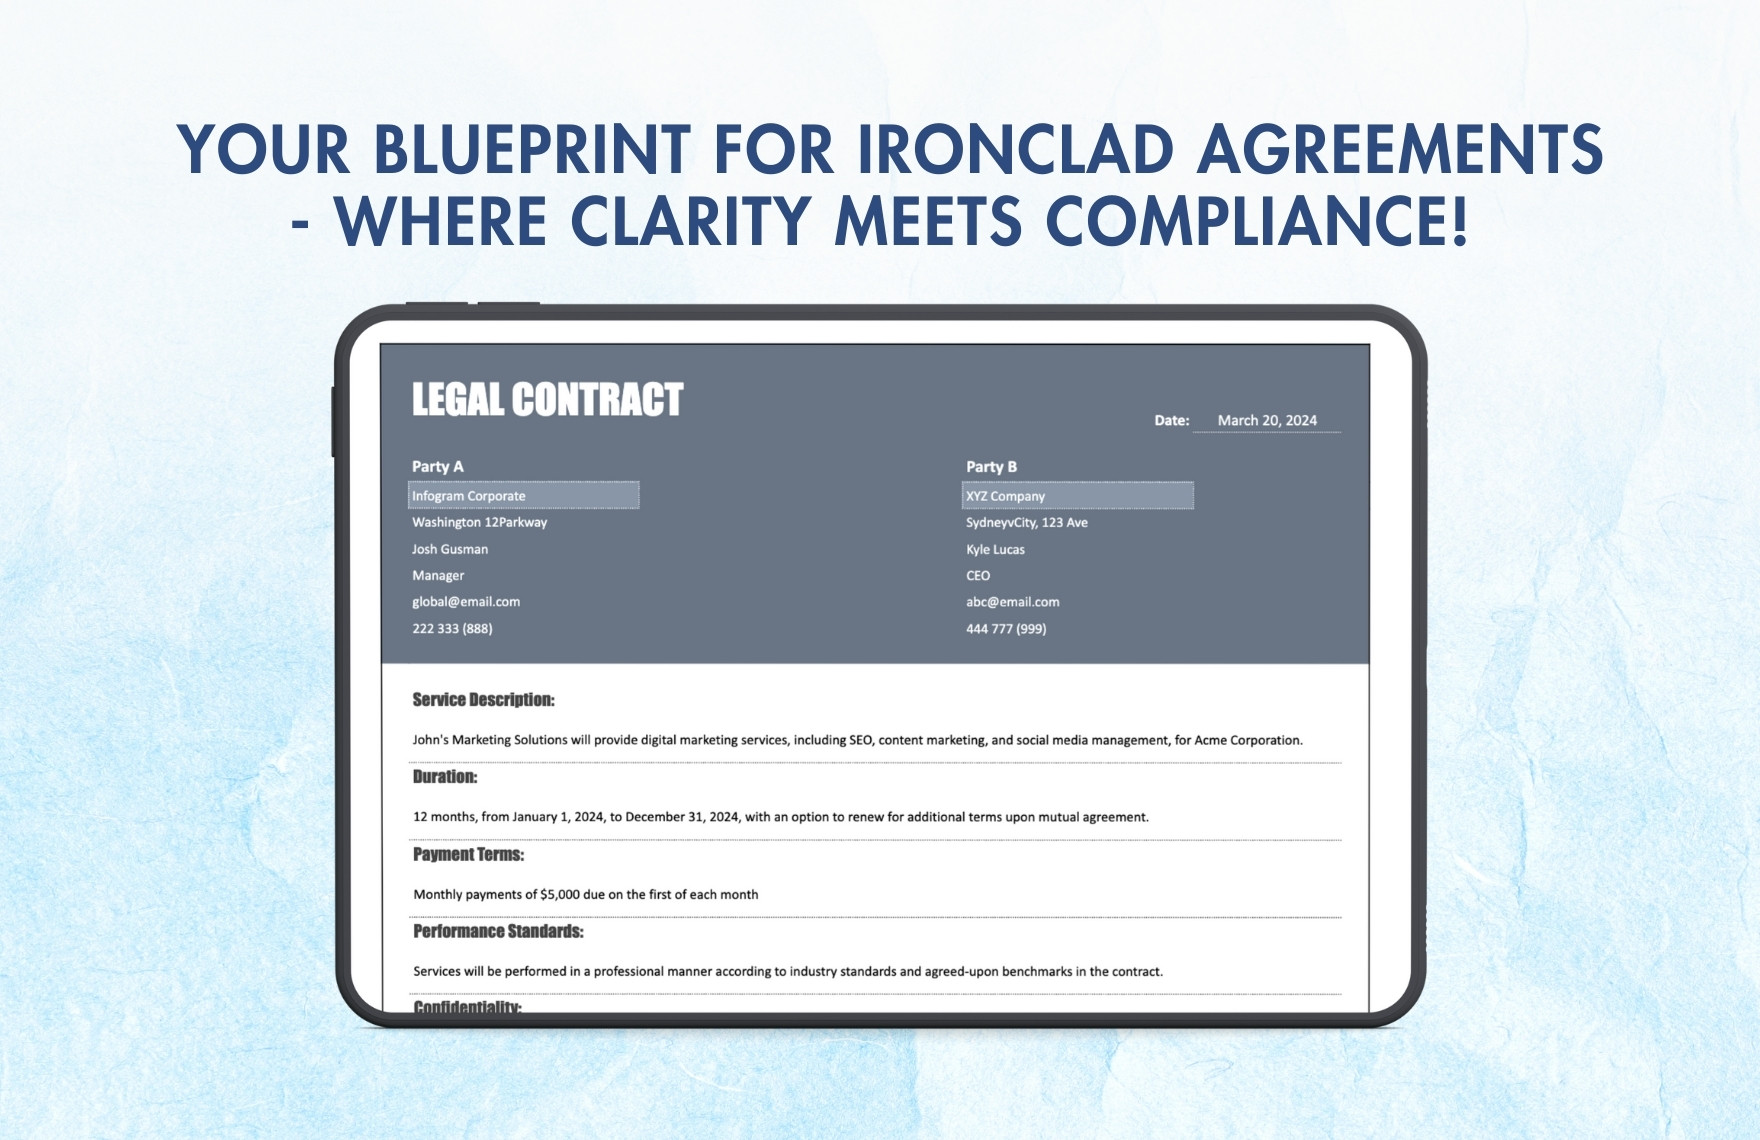 Legal Contract Template